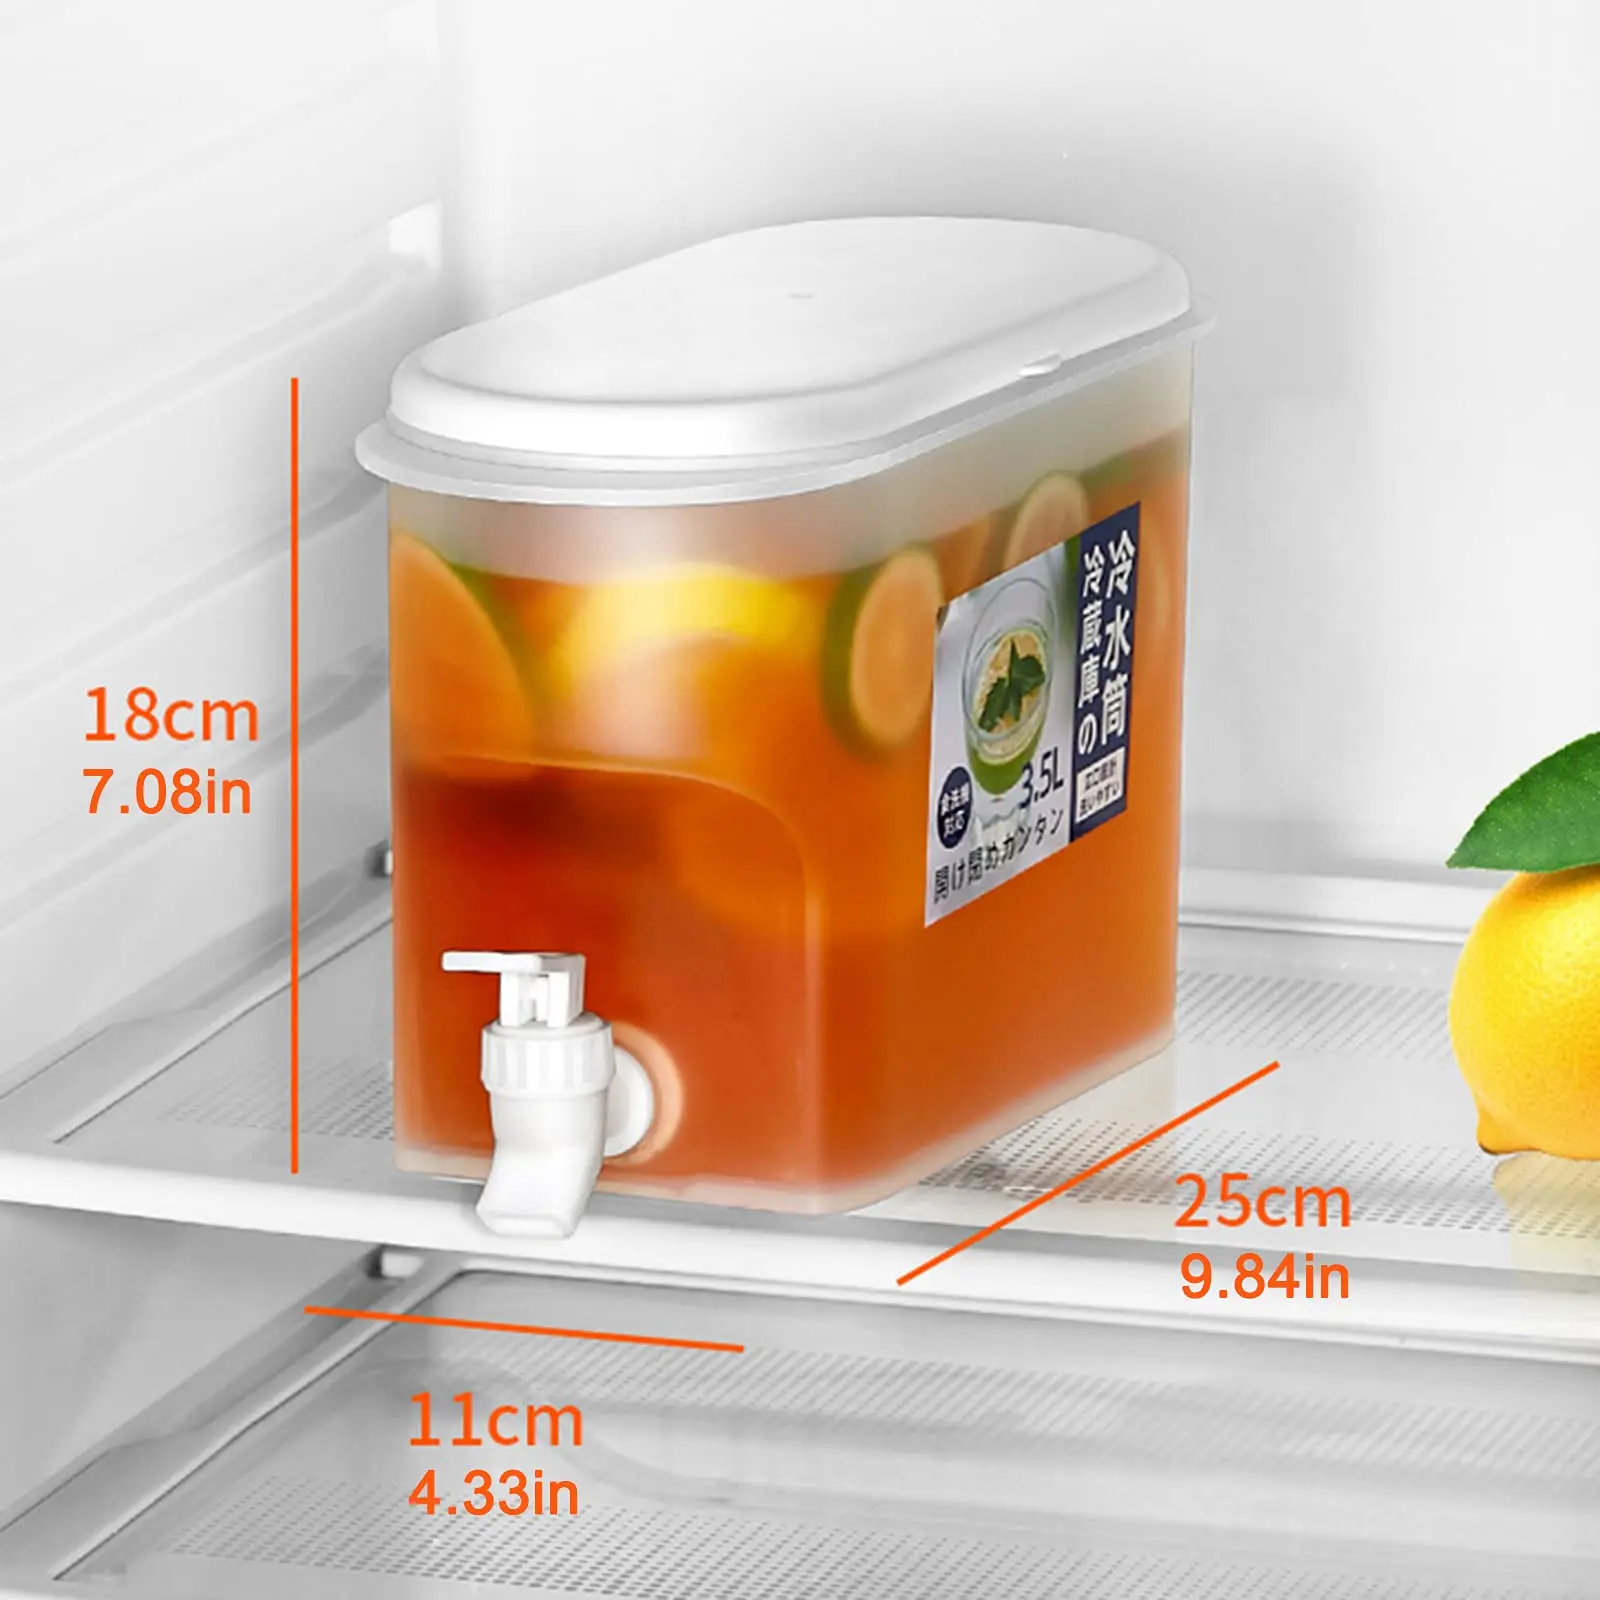 https://ae01.alicdn.com/kf/S83f04a9448384048826cc0dbe3881e11d/Refrigerator-Cold-Water-Bottle-5L-Cold-Water-Pitcher-With-Faucet-Beverage-Water-Dispenser-Cool-Water-Bucket.jpg